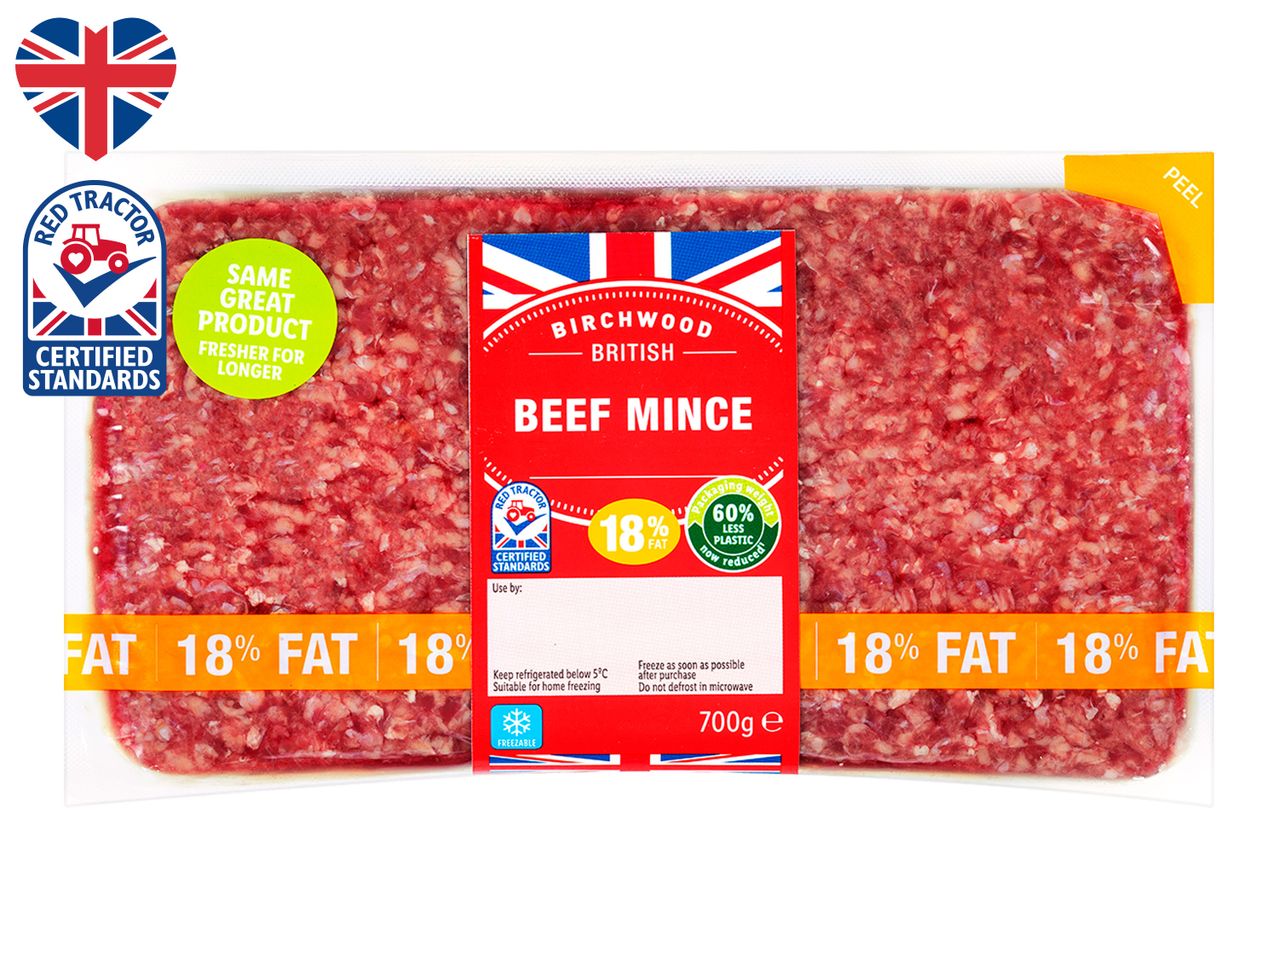 Go to full screen view: Birchwood British Beef Mince 18% Fat - Image 1